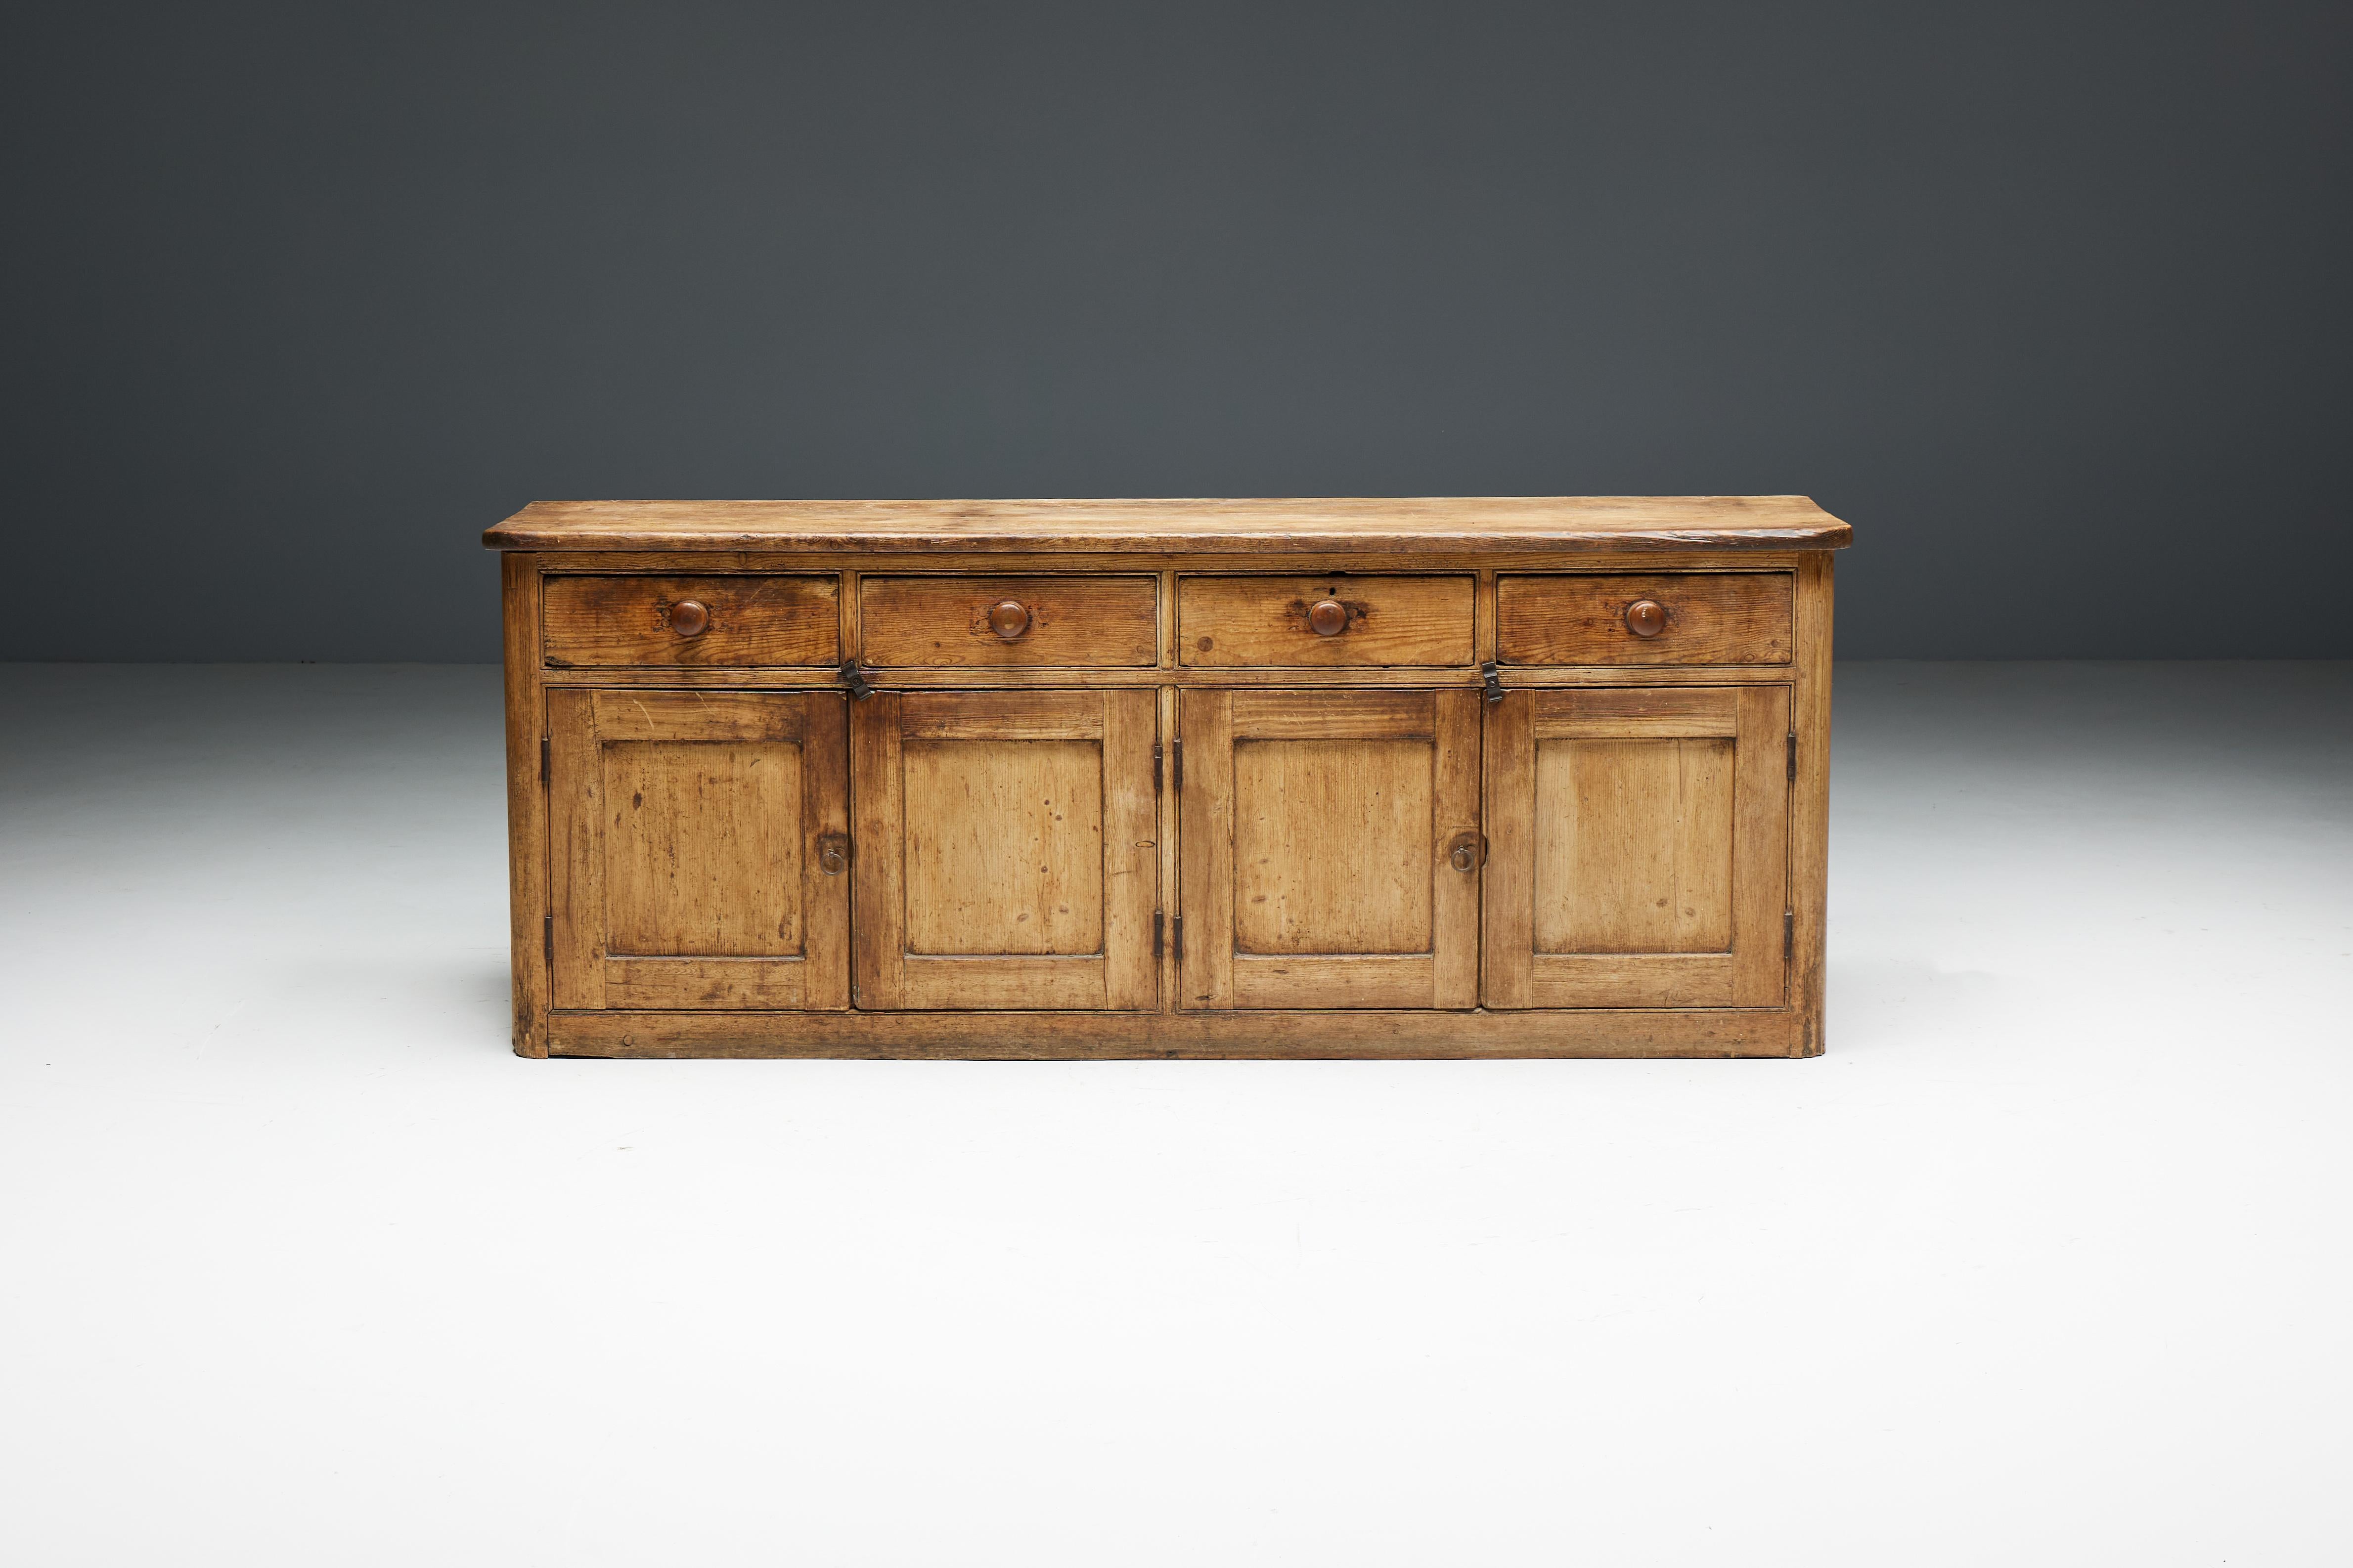 19th-century rustic softwood sideboard, a remarkable demonstration of masterful craftsmanship. Crafted from the finest softwood, this sideboard exemplifies unparalleled craftsmanship refined over generations. With four doors revealing generous